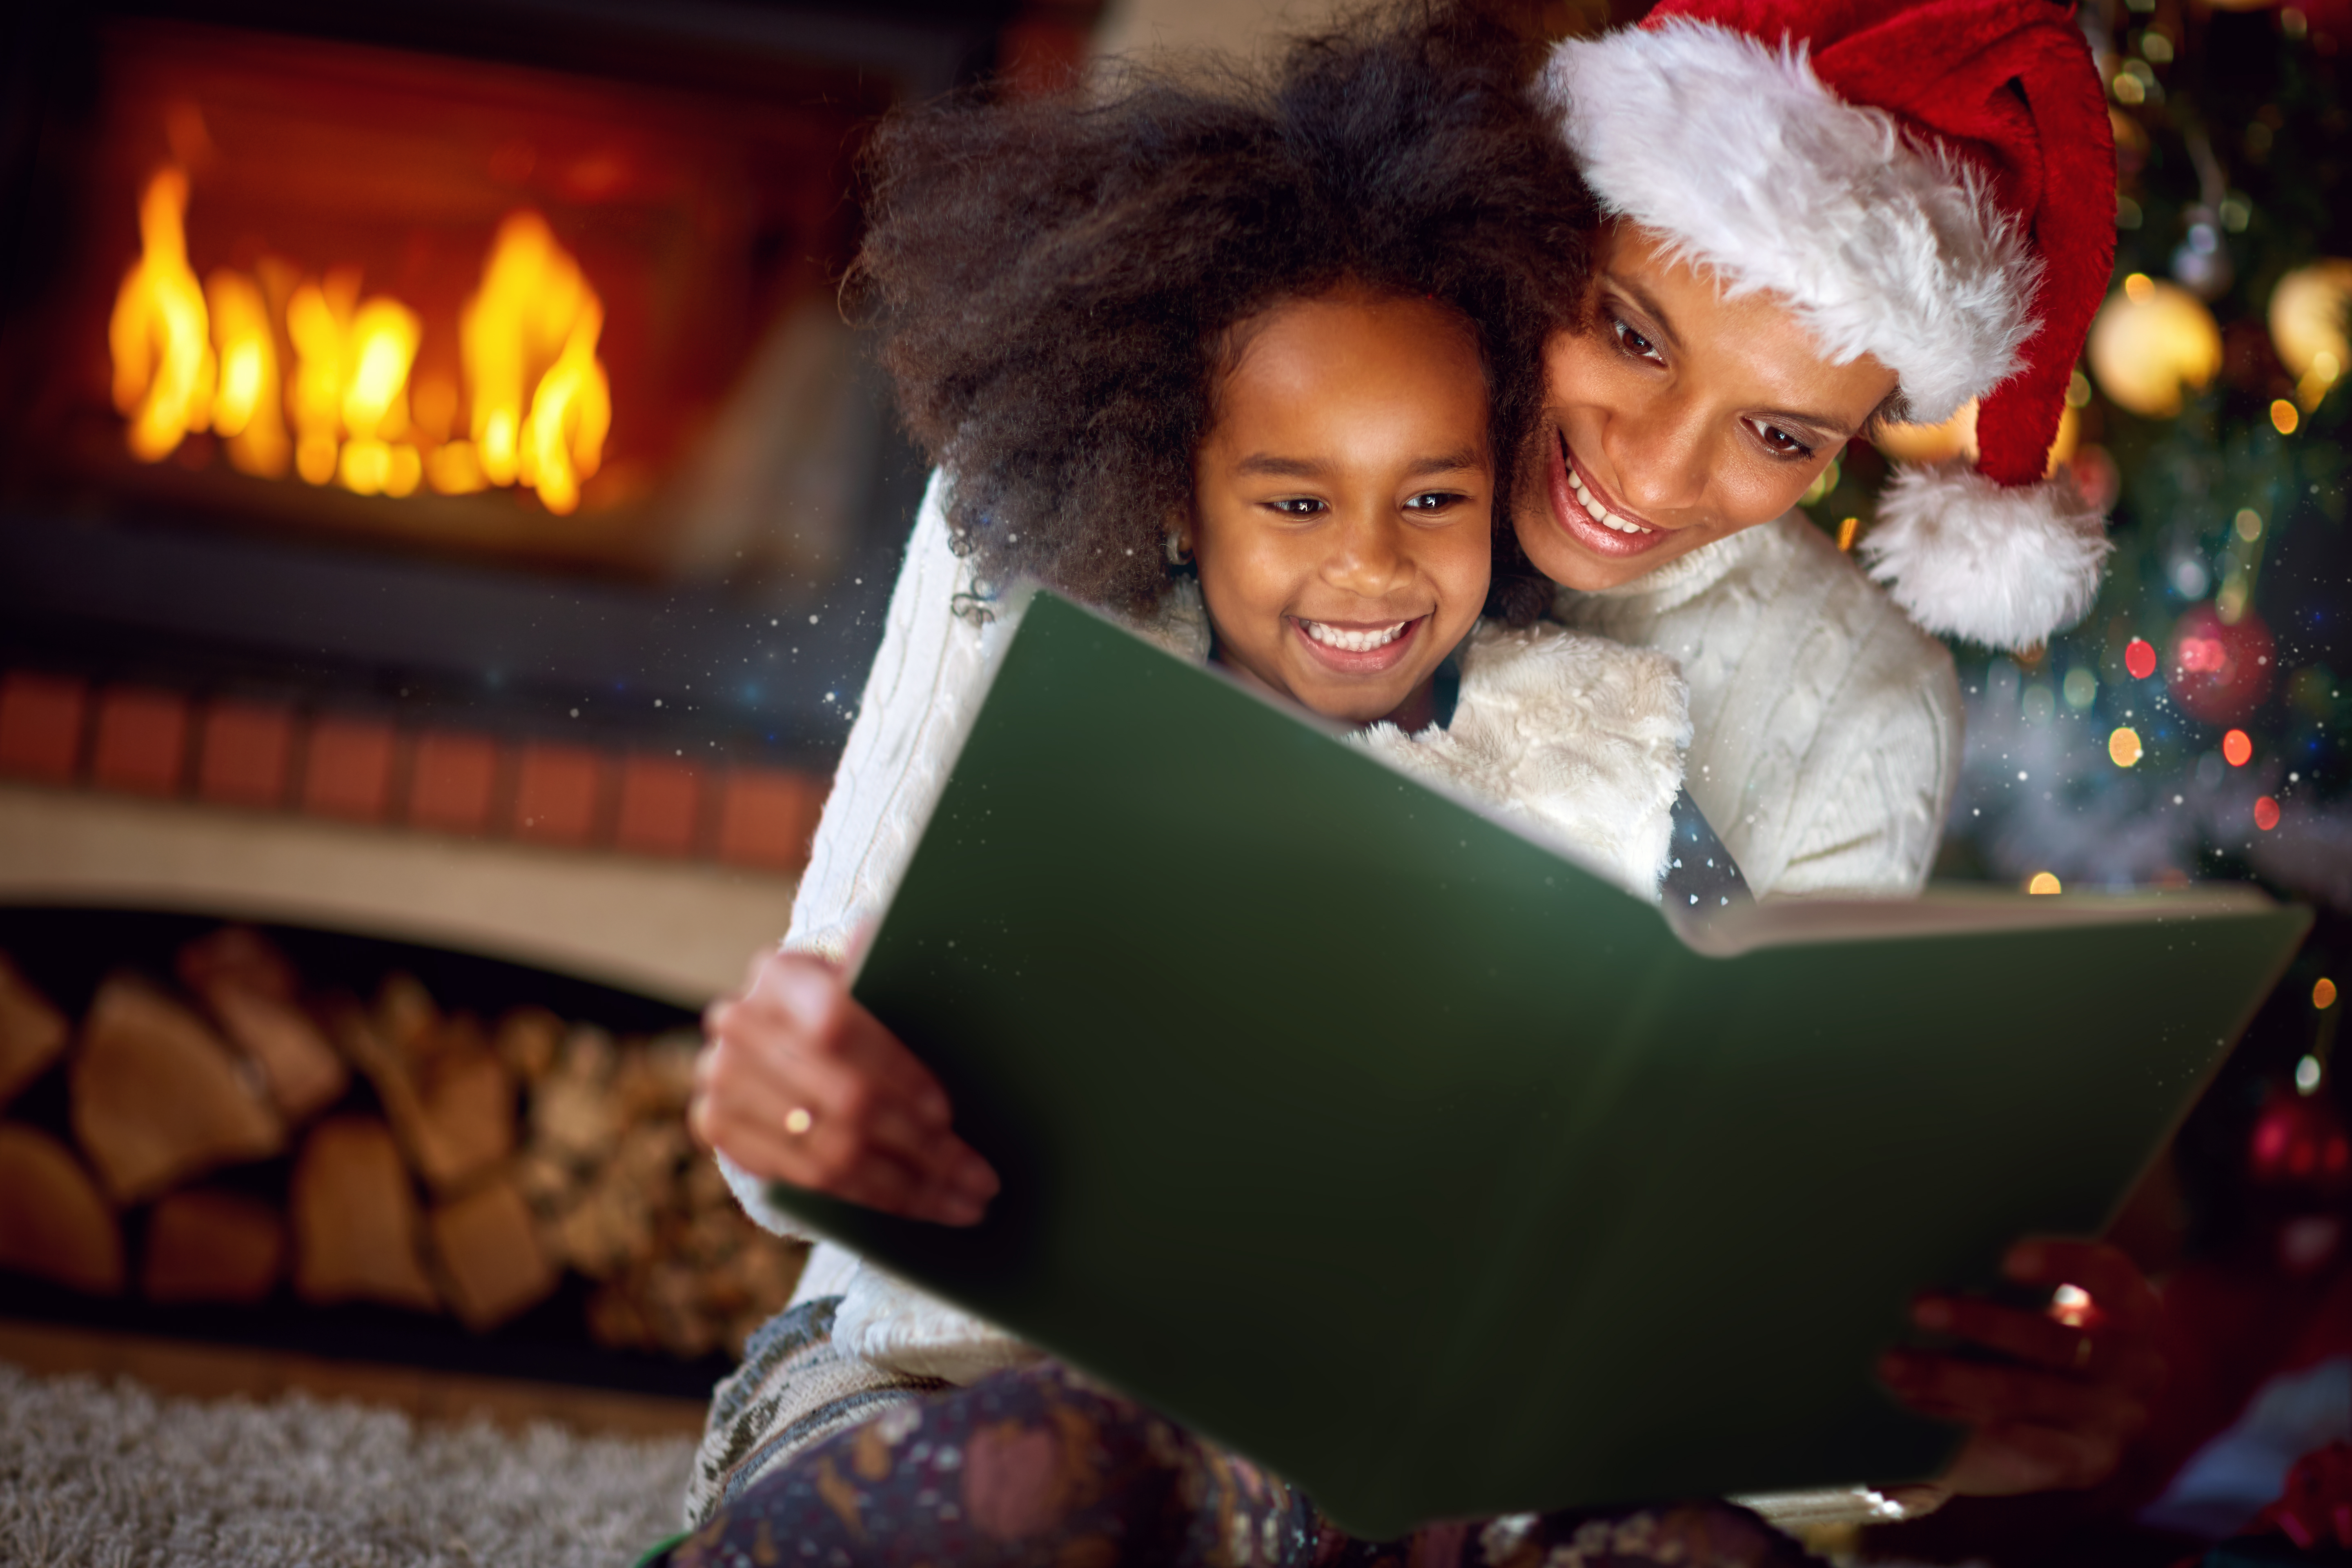 a happy child reads a book in the arms of a loved one (seemingly her mother). The adult is wearing a santa hat and they are sitting in front of the fire. Their faces are lighting up from a light beaming from the insight of the book.